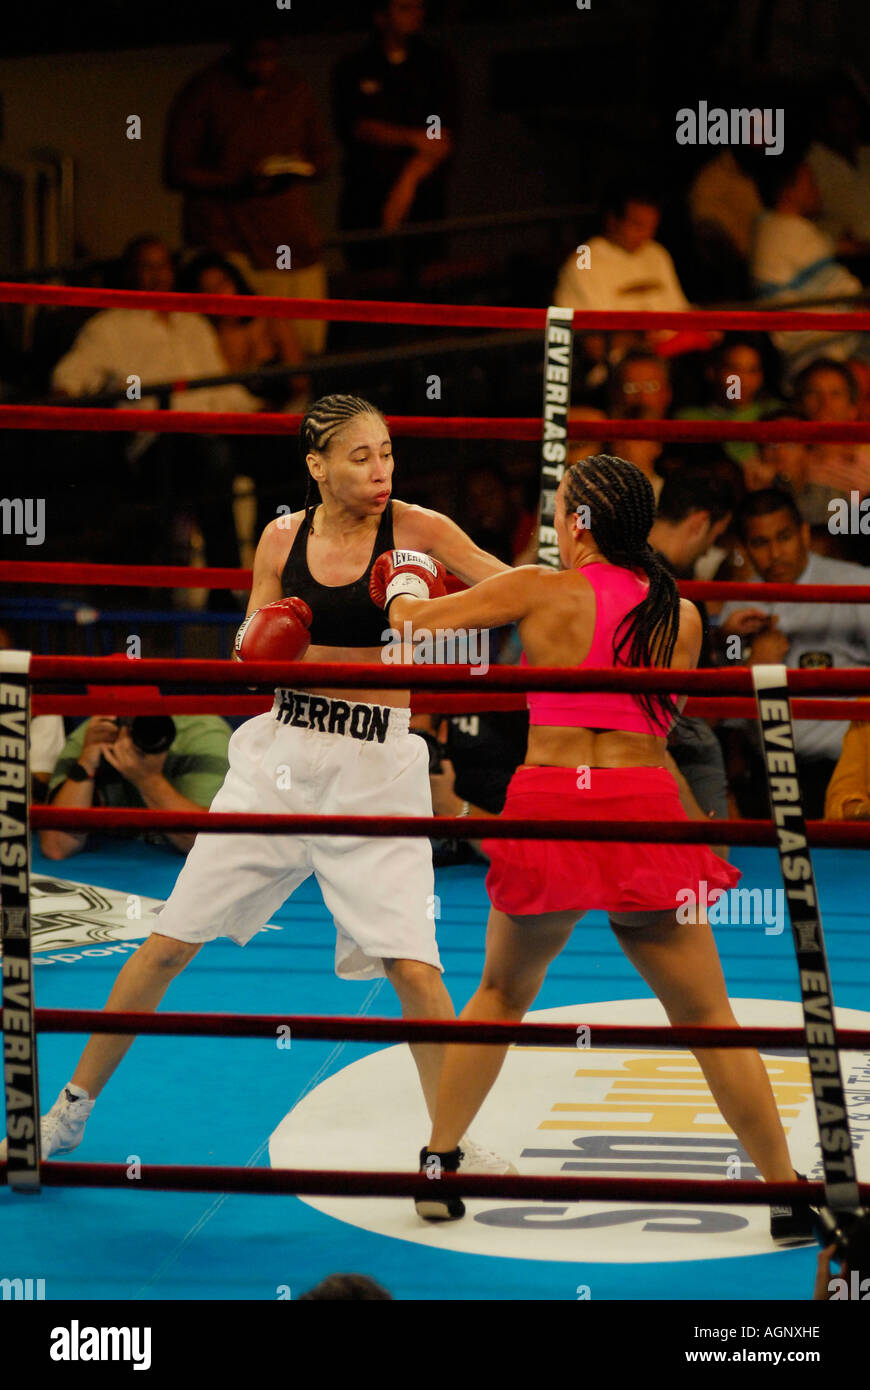 New York August 5 2006 HBO World Championship Boxing at the Theater at  Madison Square Garden Bantamweights Swing Bout Female boxing Noriko Kariya  vs Michelle Herron EDITORIAL USE ONLY Stock Photo - Alamy